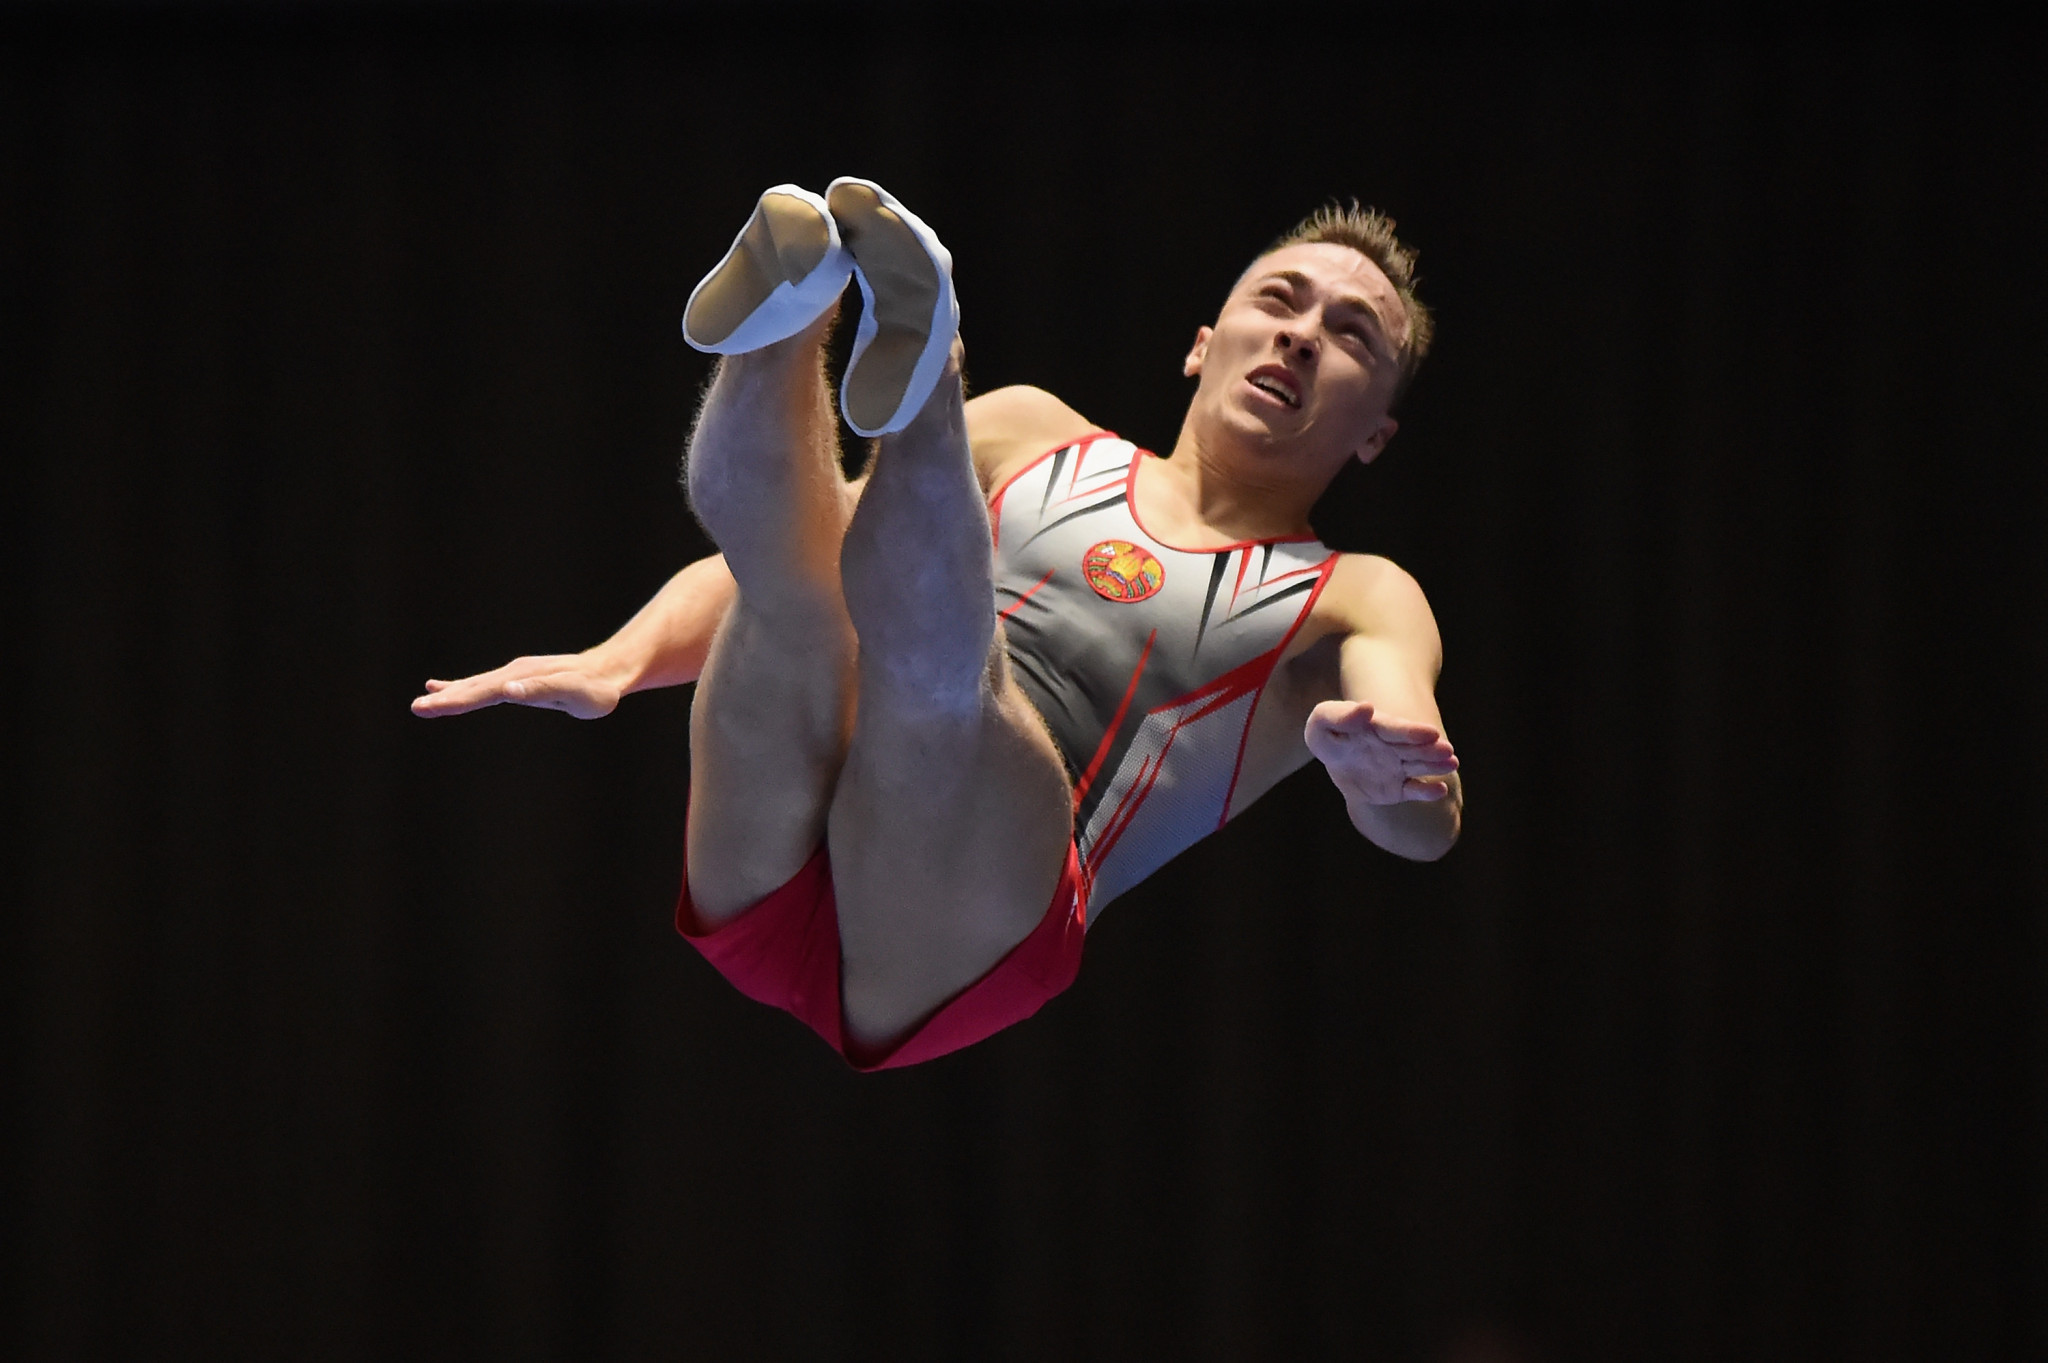 Melnik takes individual gold to deny Olympic champion Hancharou at FIG Trampoline World Cup